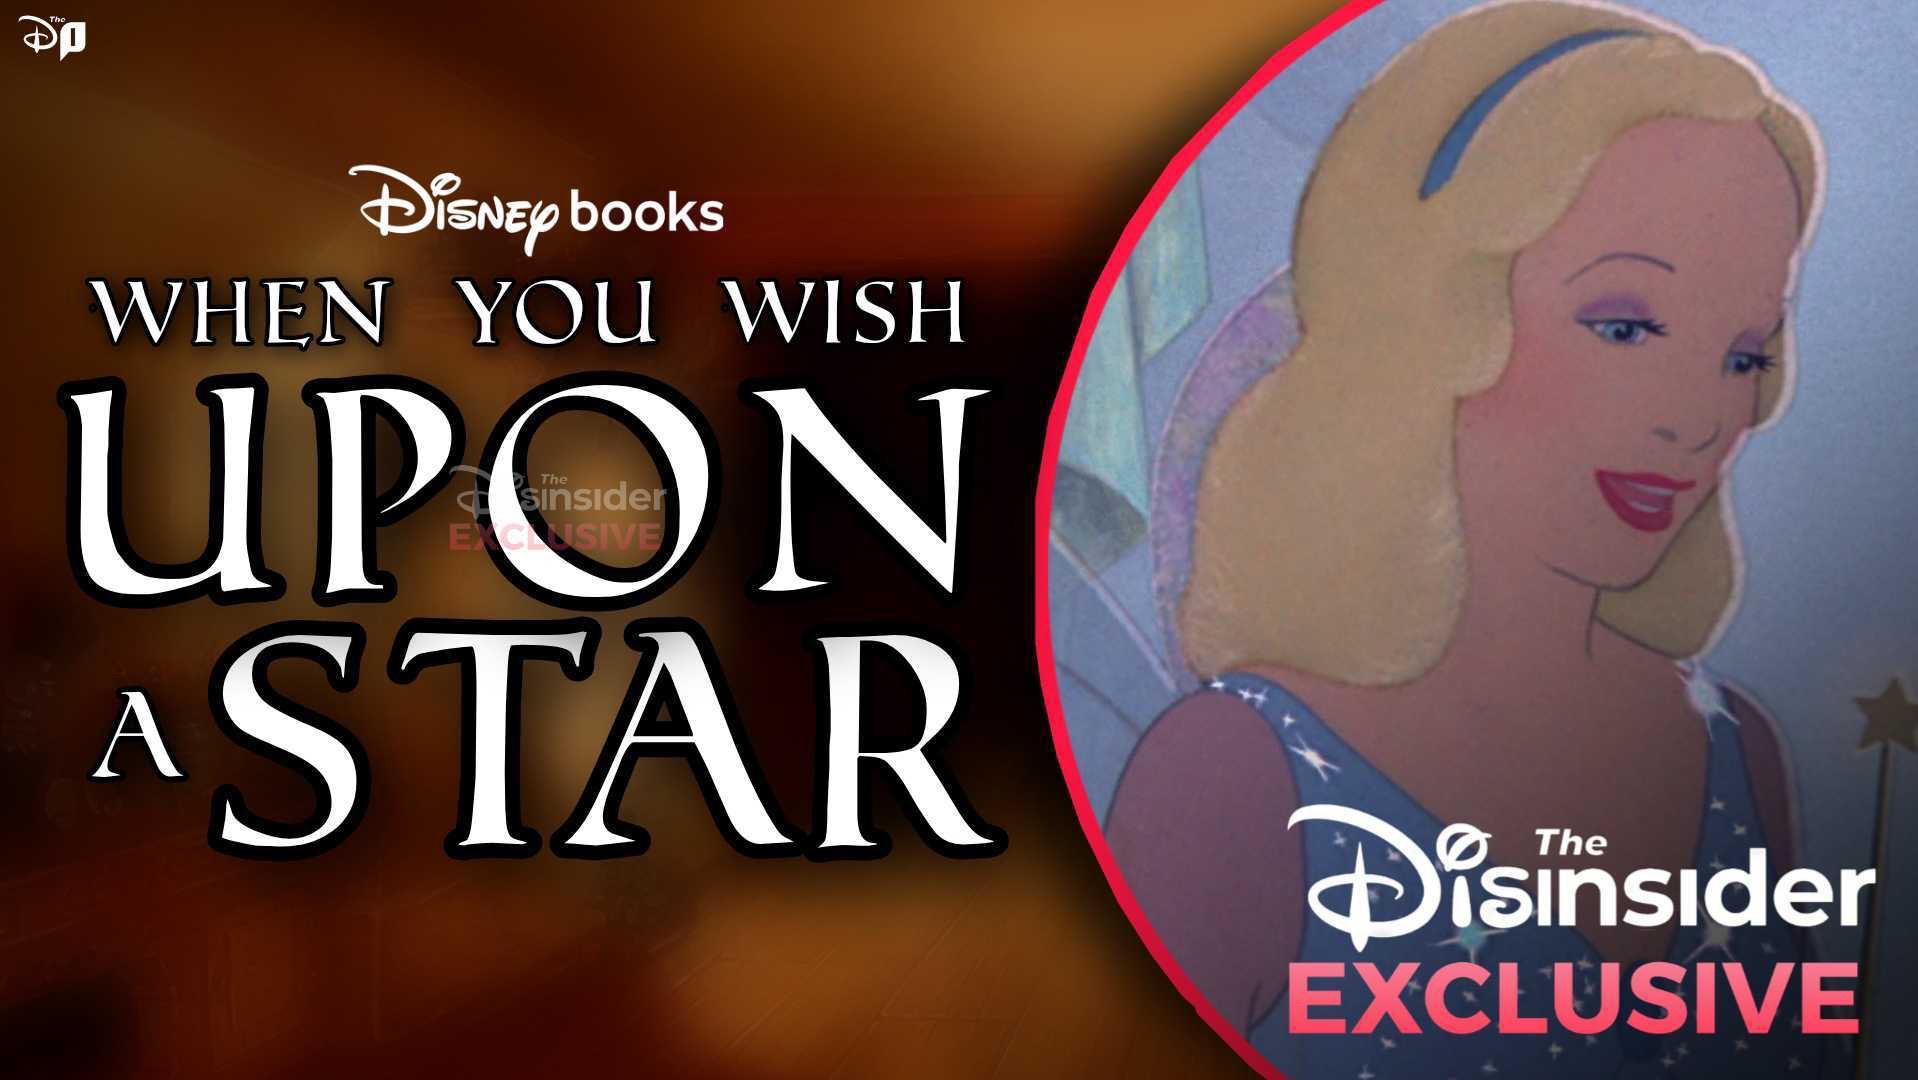 EXCLUSIVE: First Details, Artwork Revealed For Disney’s Pinocchio-Themed Twisted Tale ‘When You Wish Upon A Star’